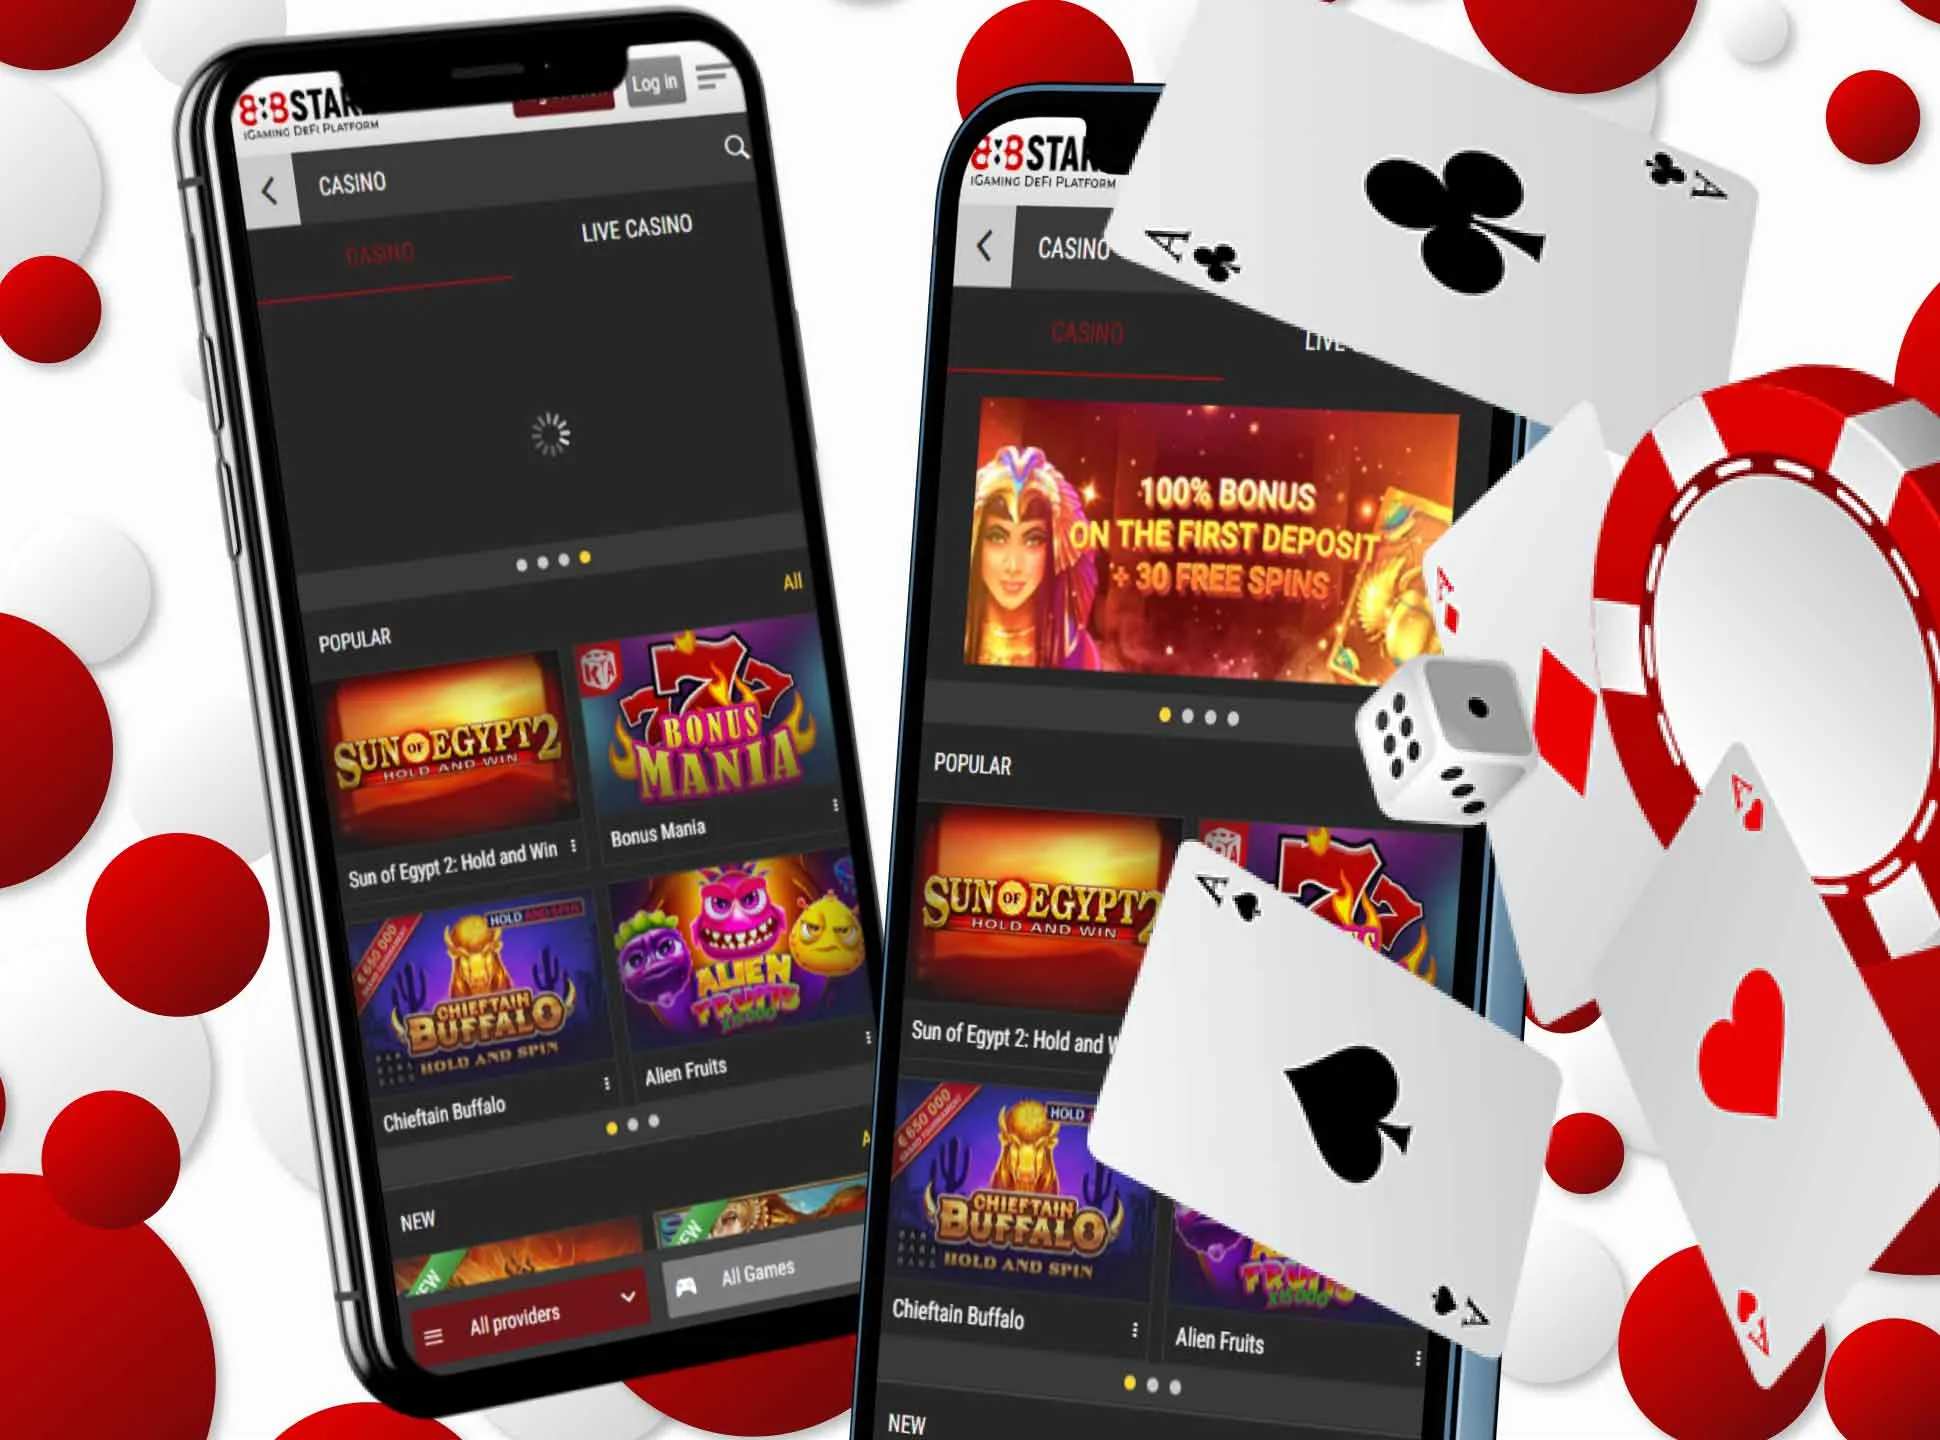 In the 888starz app you will find various online casino games.